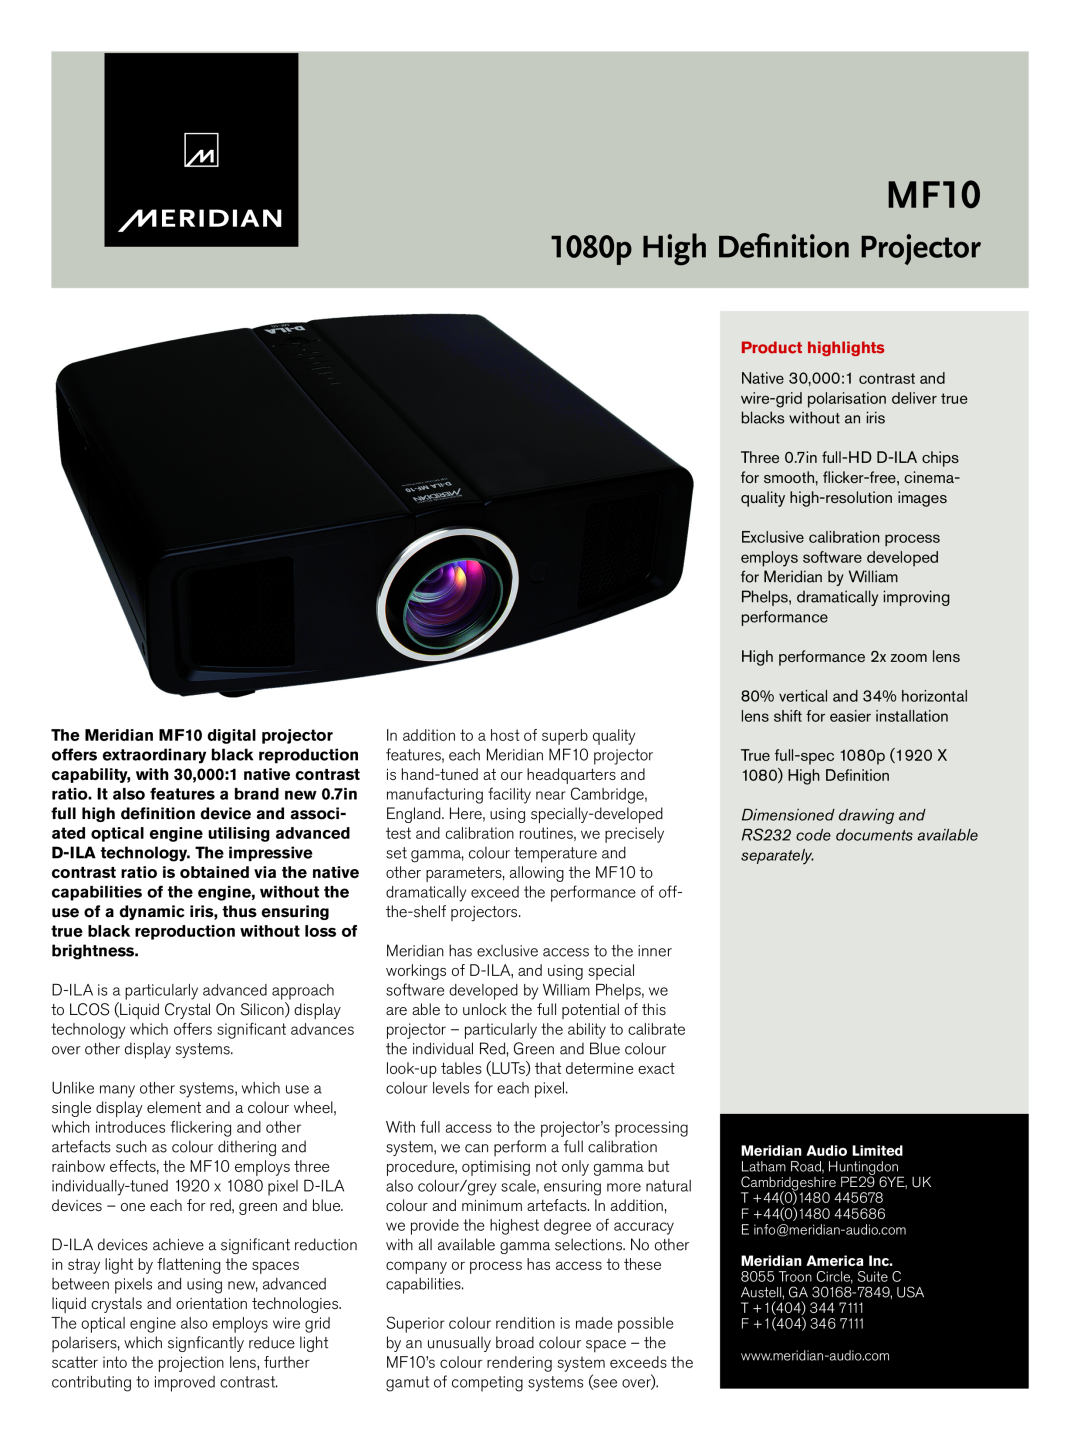 Meridian America MF10 manual 1080p High Definition Projector, Product highlights, High performance 2x zoom lens 